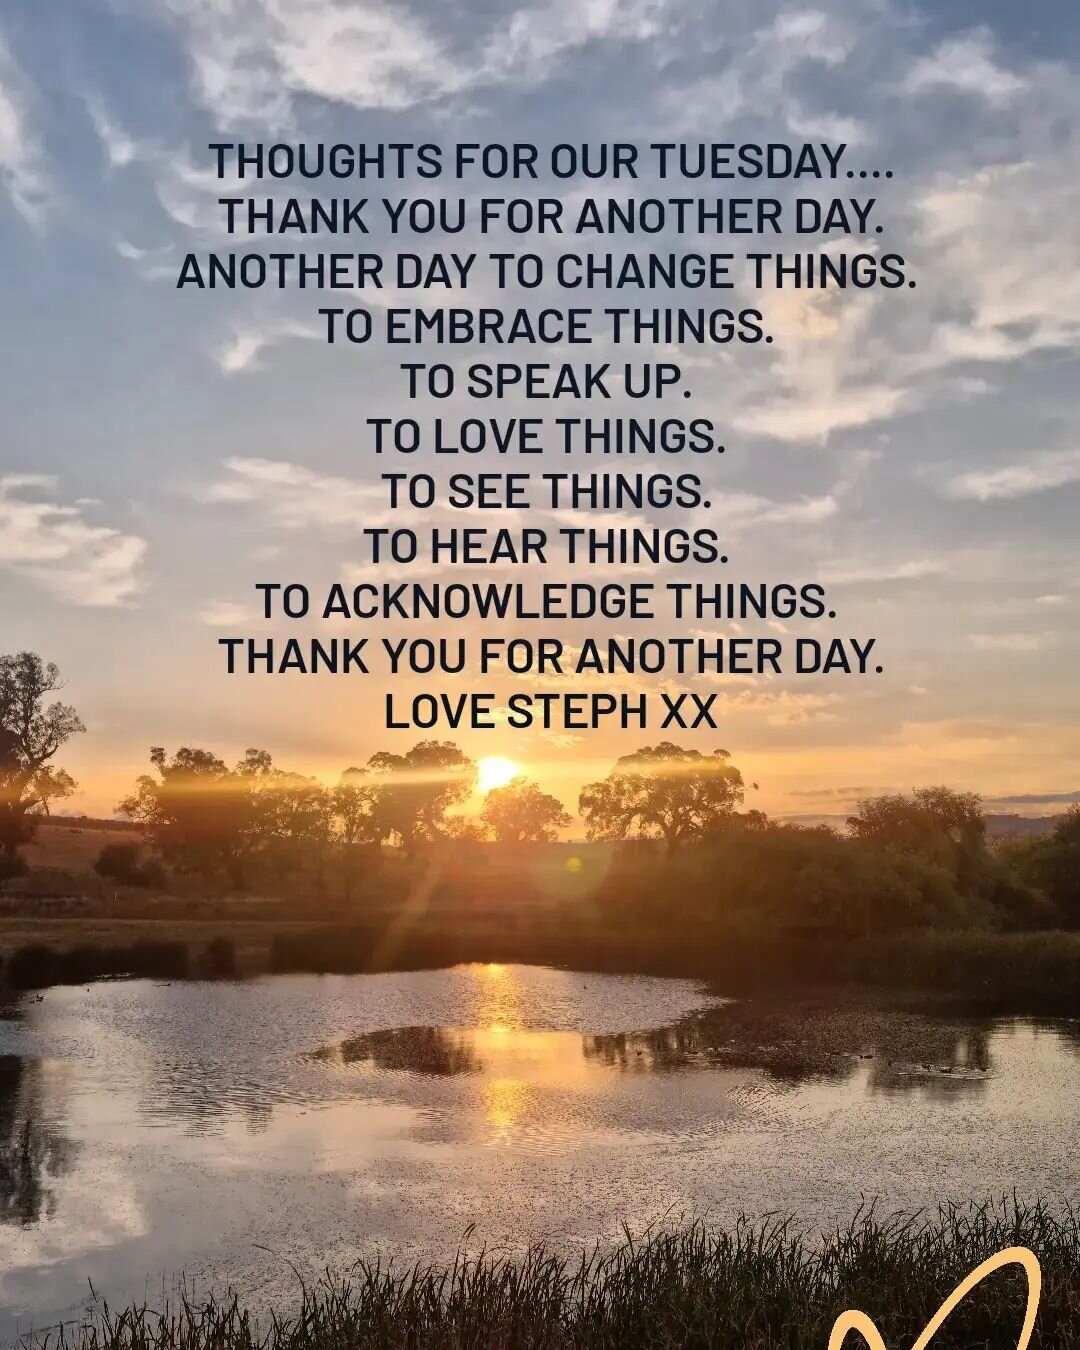 THOUGHTS FOR OUR TUESDAY....
THANK YOU FOR ANOTHER DAY.
ANOTHER DAY TO CHANGE THINGS. 
TO EMBRACE THINGS. 
TO SPEAK UP. 
TO LOVE THINGS. 
TO SEE THINGS. 
TO HEAR THINGS. 
TO ACKNOWLEDGE THINGS. 
THANK YOU FOR ANOTHER DAY.
LOVE STEPH XX
.
#stephanicor